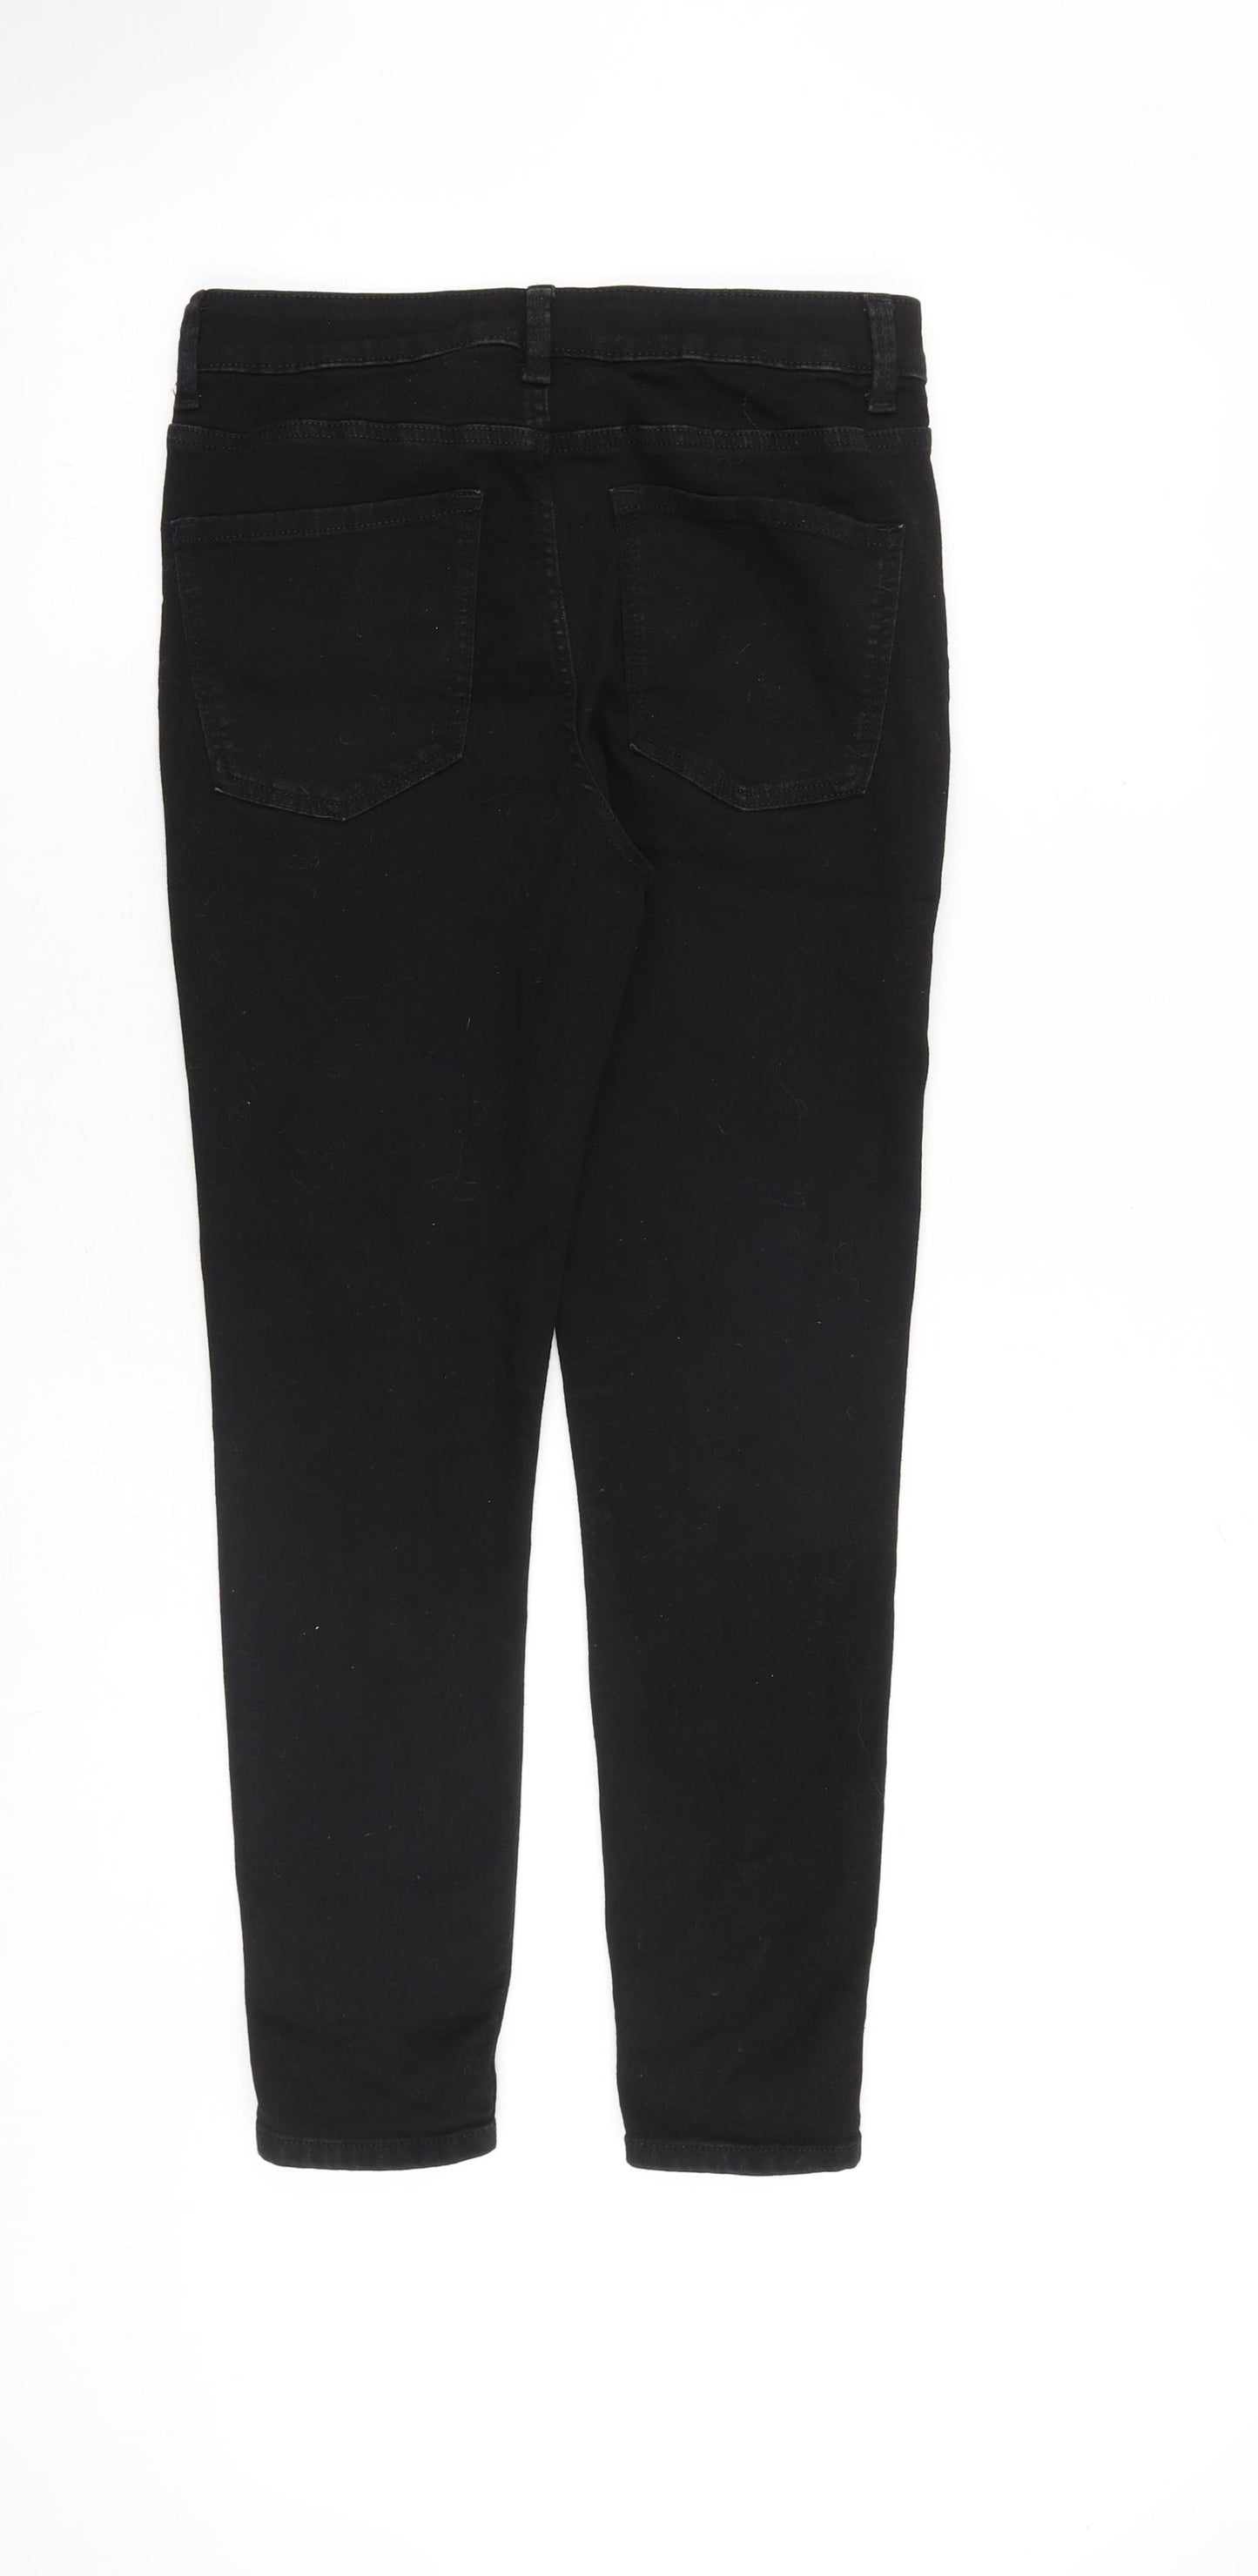 Marks and Spencer Womens Black Cotton Skinny Jeans Size 10 Slim Zip